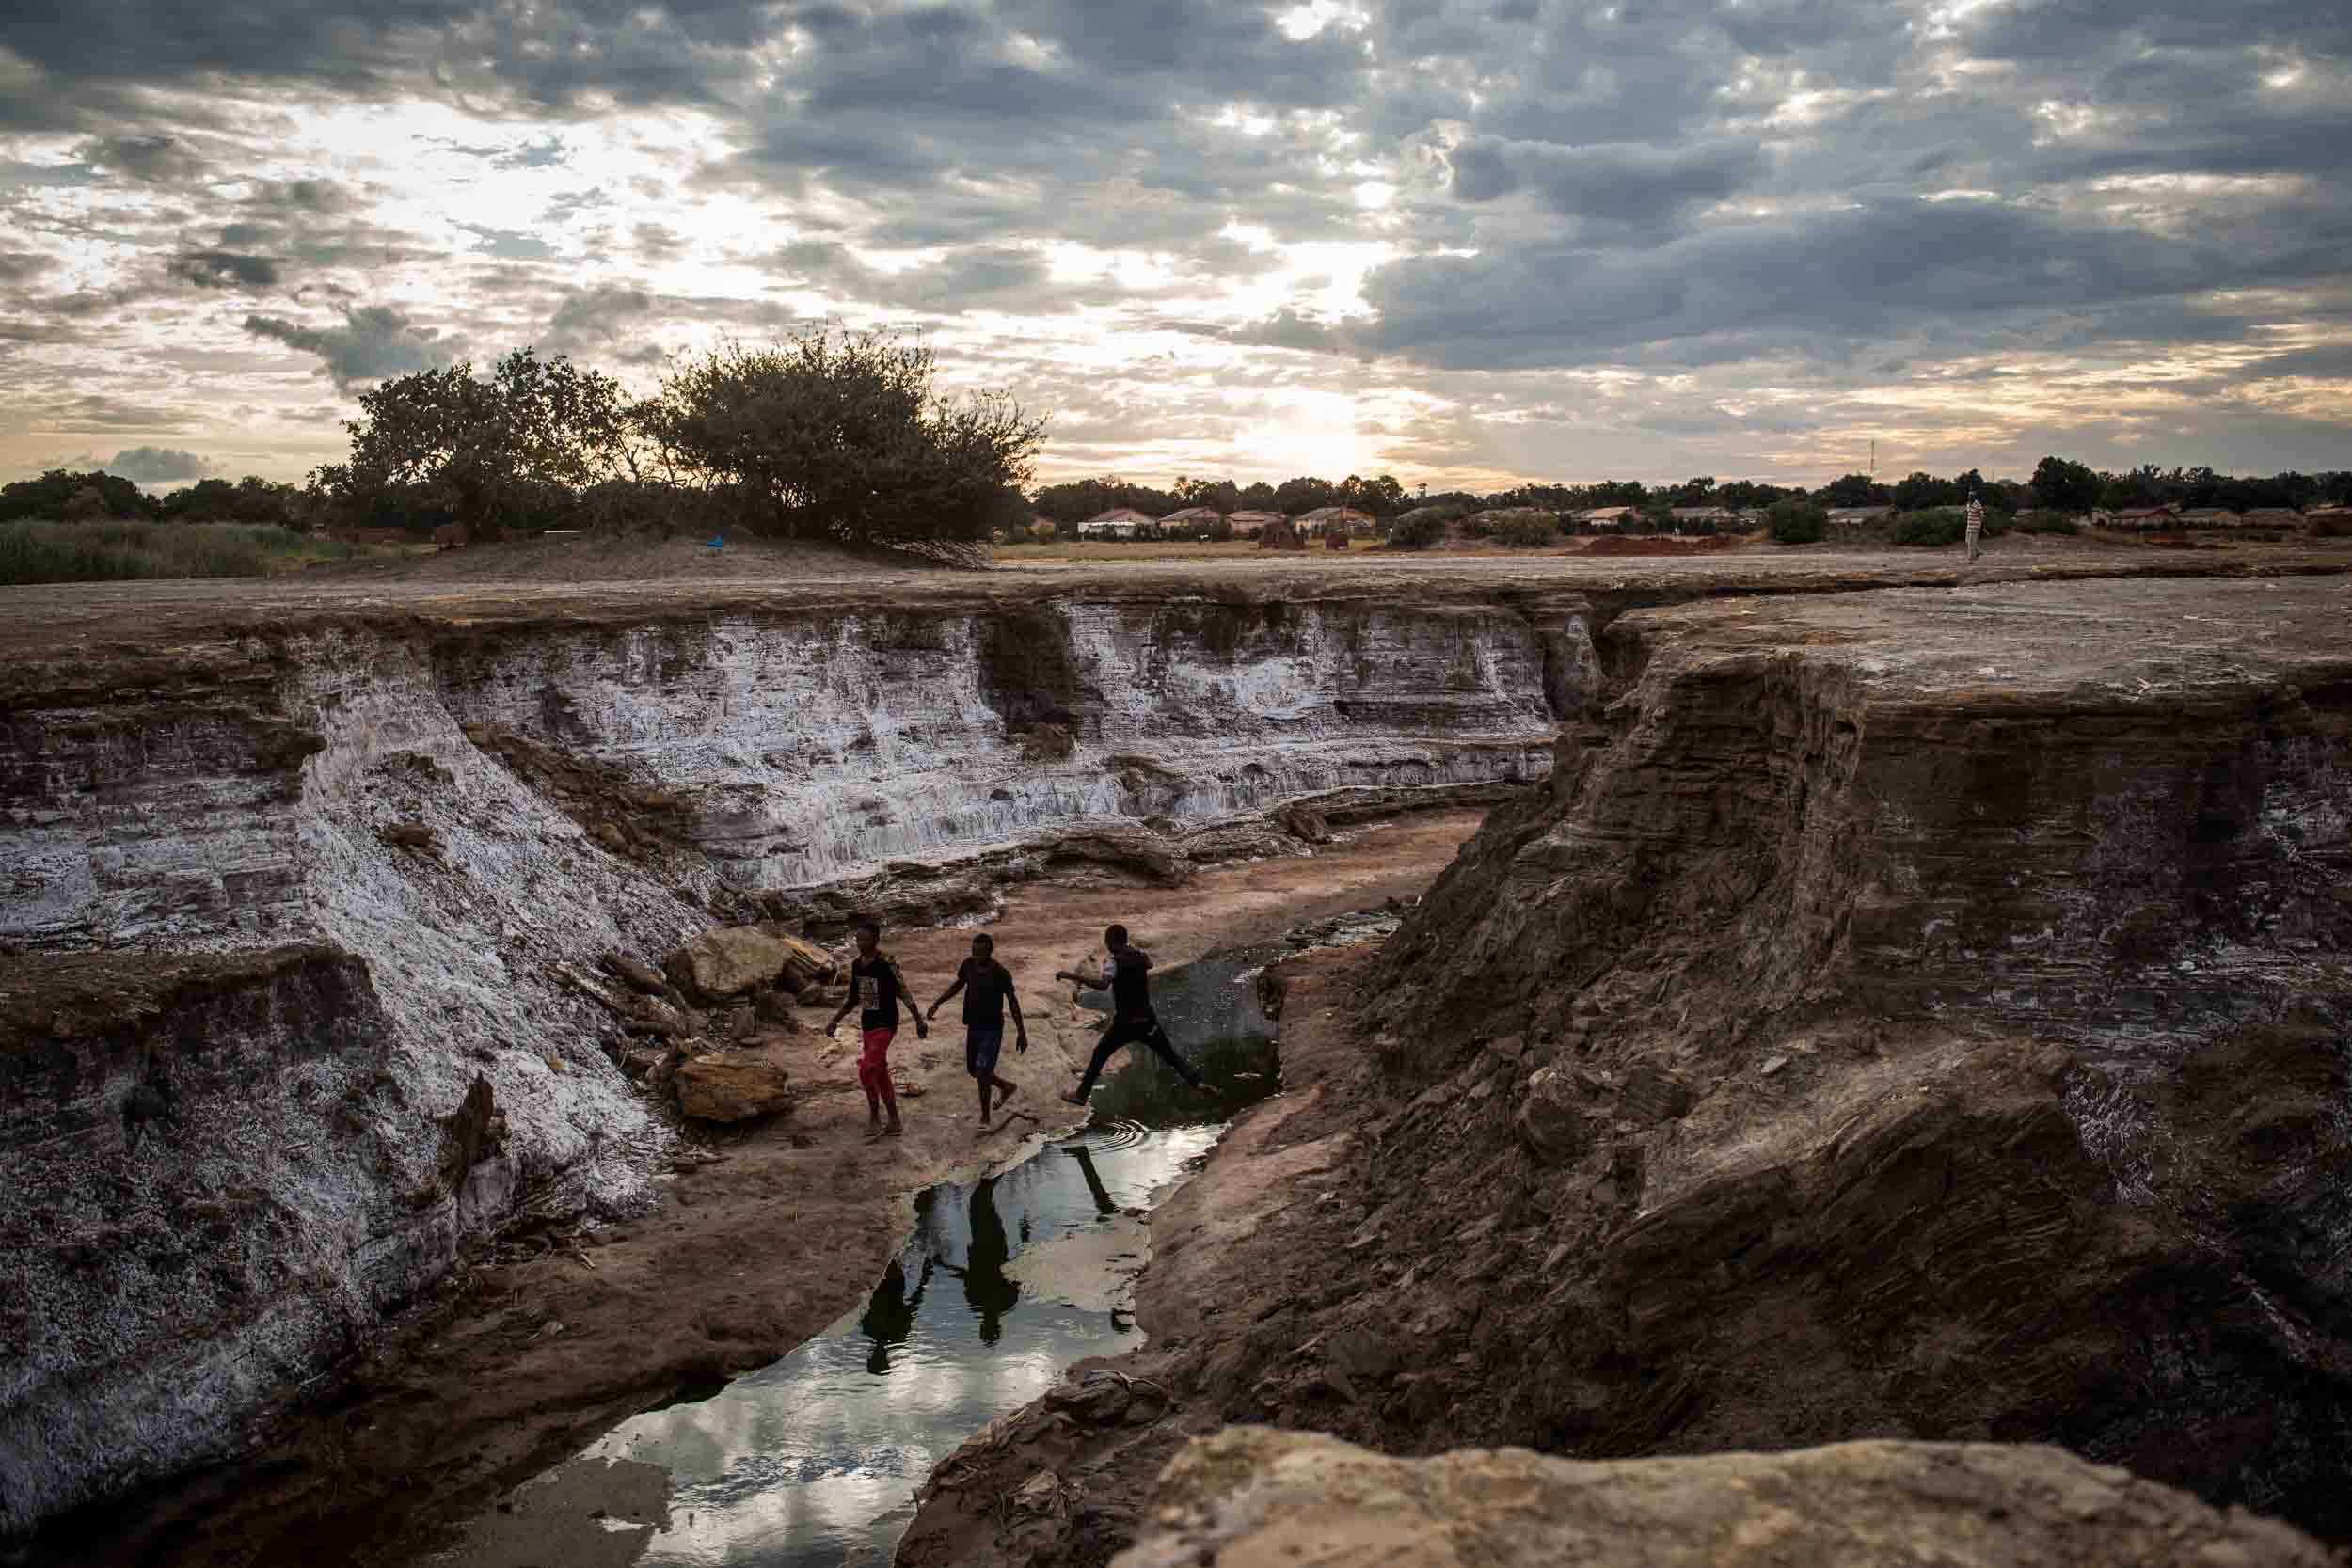  Children walk near Kipushi, a traditional mining city in the heart of Congo’s mining sector. The area has become a toxic desert  after a mining company dumped toxic waste in 1930, killing all the vegetation. The dominant mining narrative in DRC is a